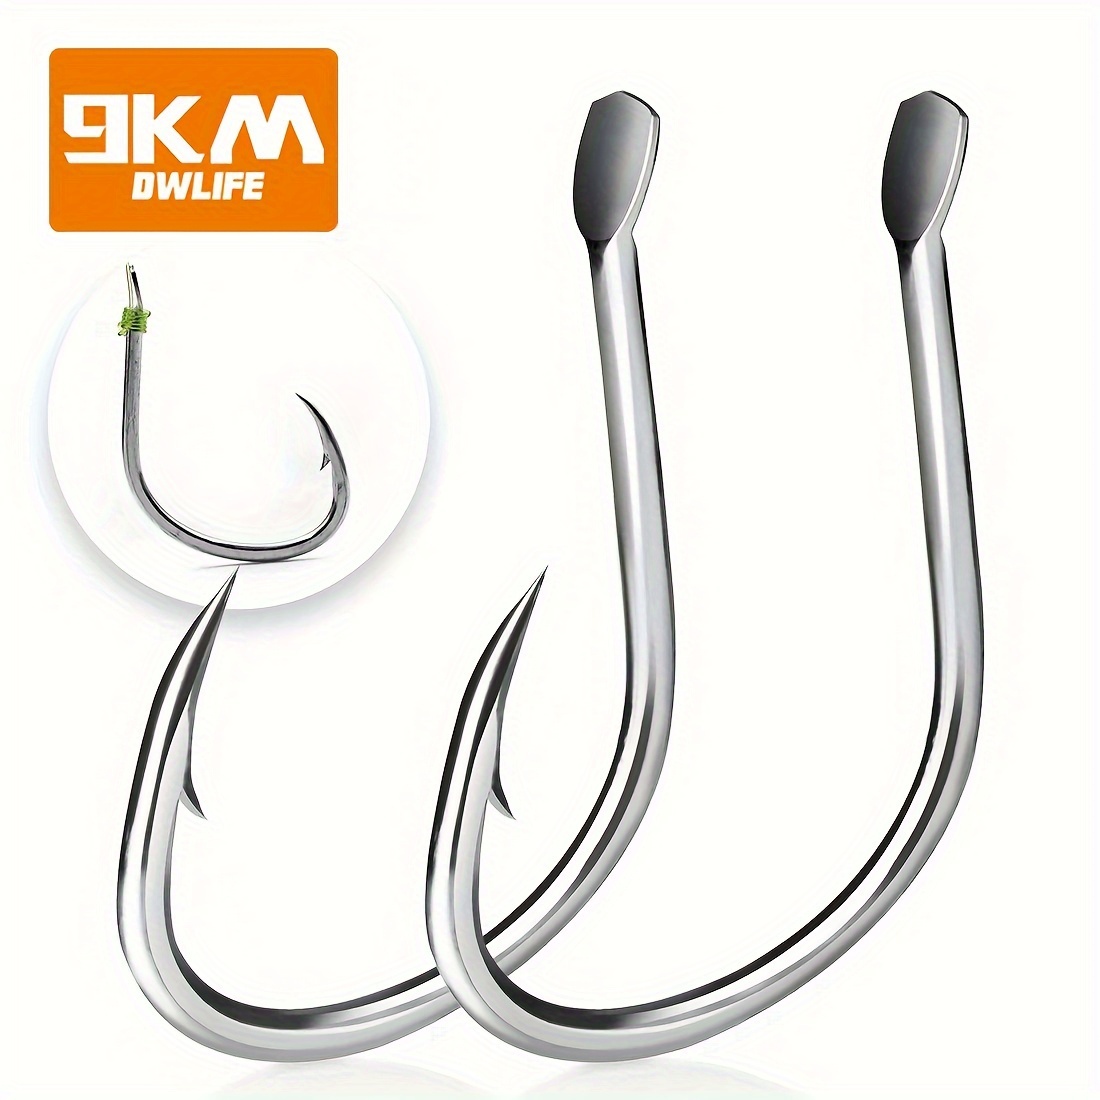 Fishing Live Bait Hooks 2X Strong Stainless Steel Fishing, 56% OFF